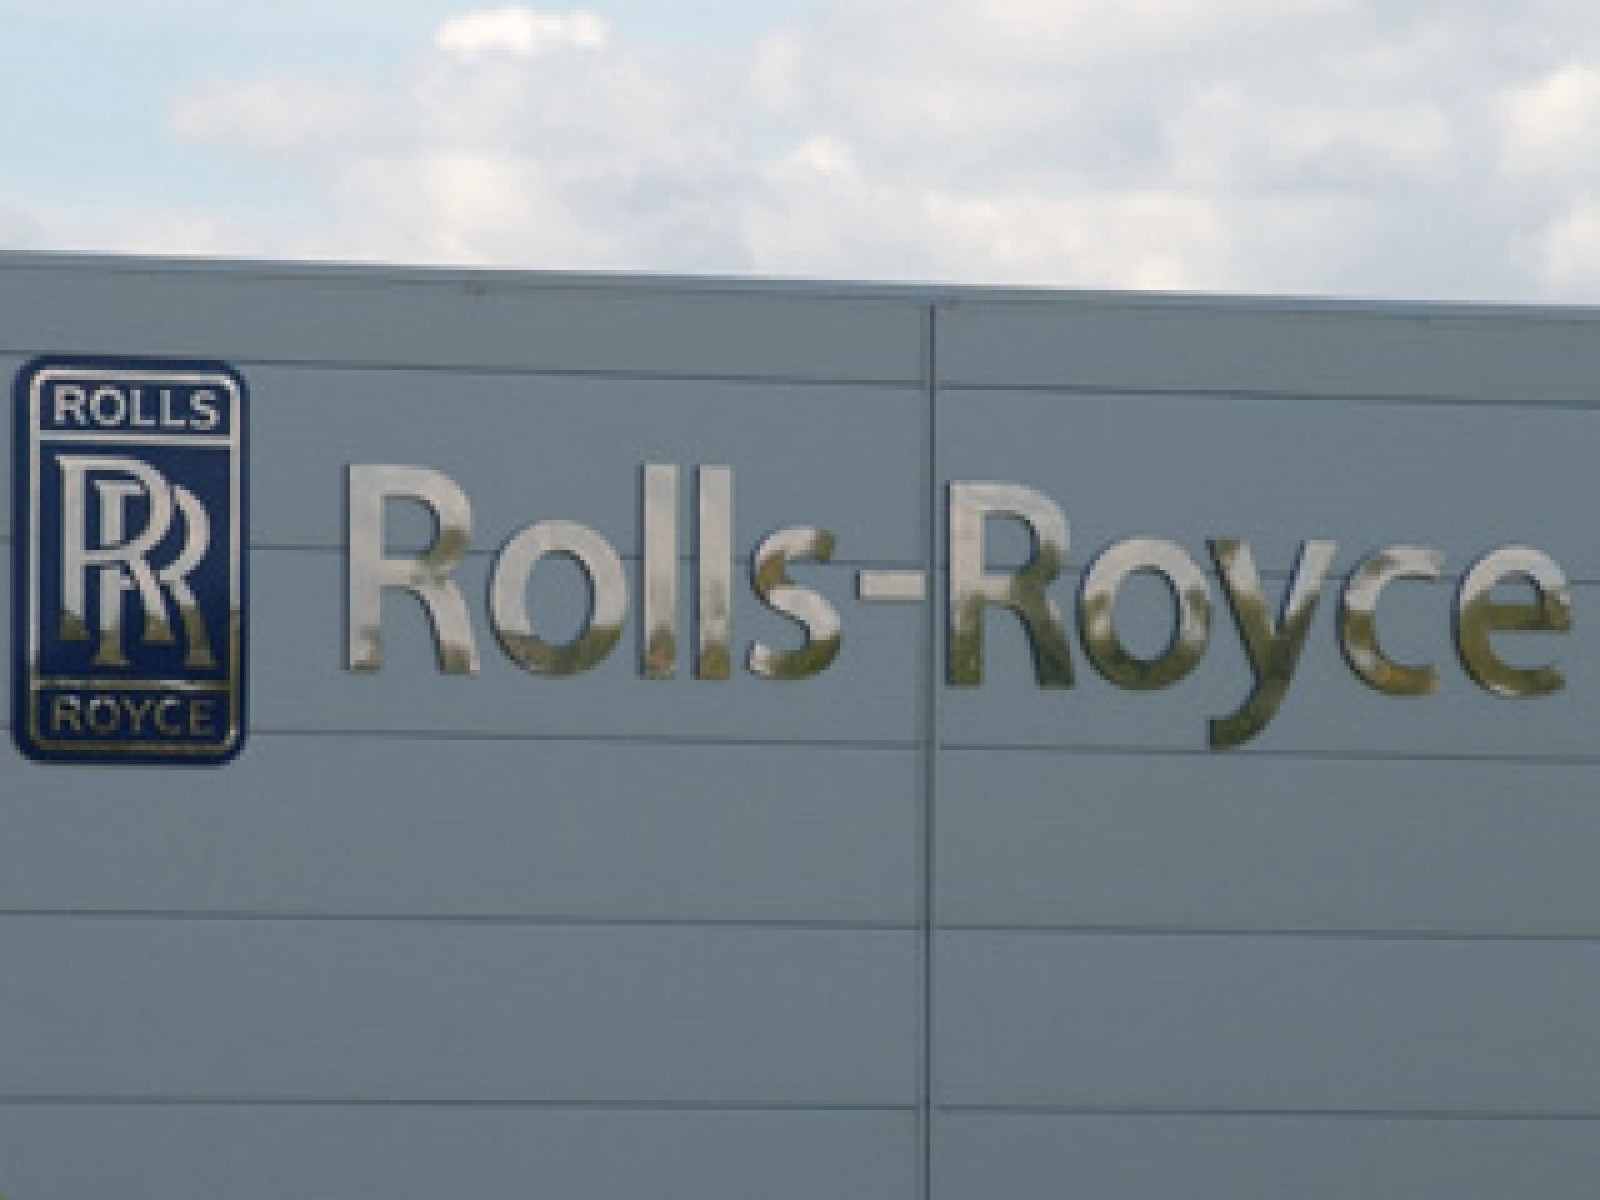 Rolls Royce could be engine of recovery